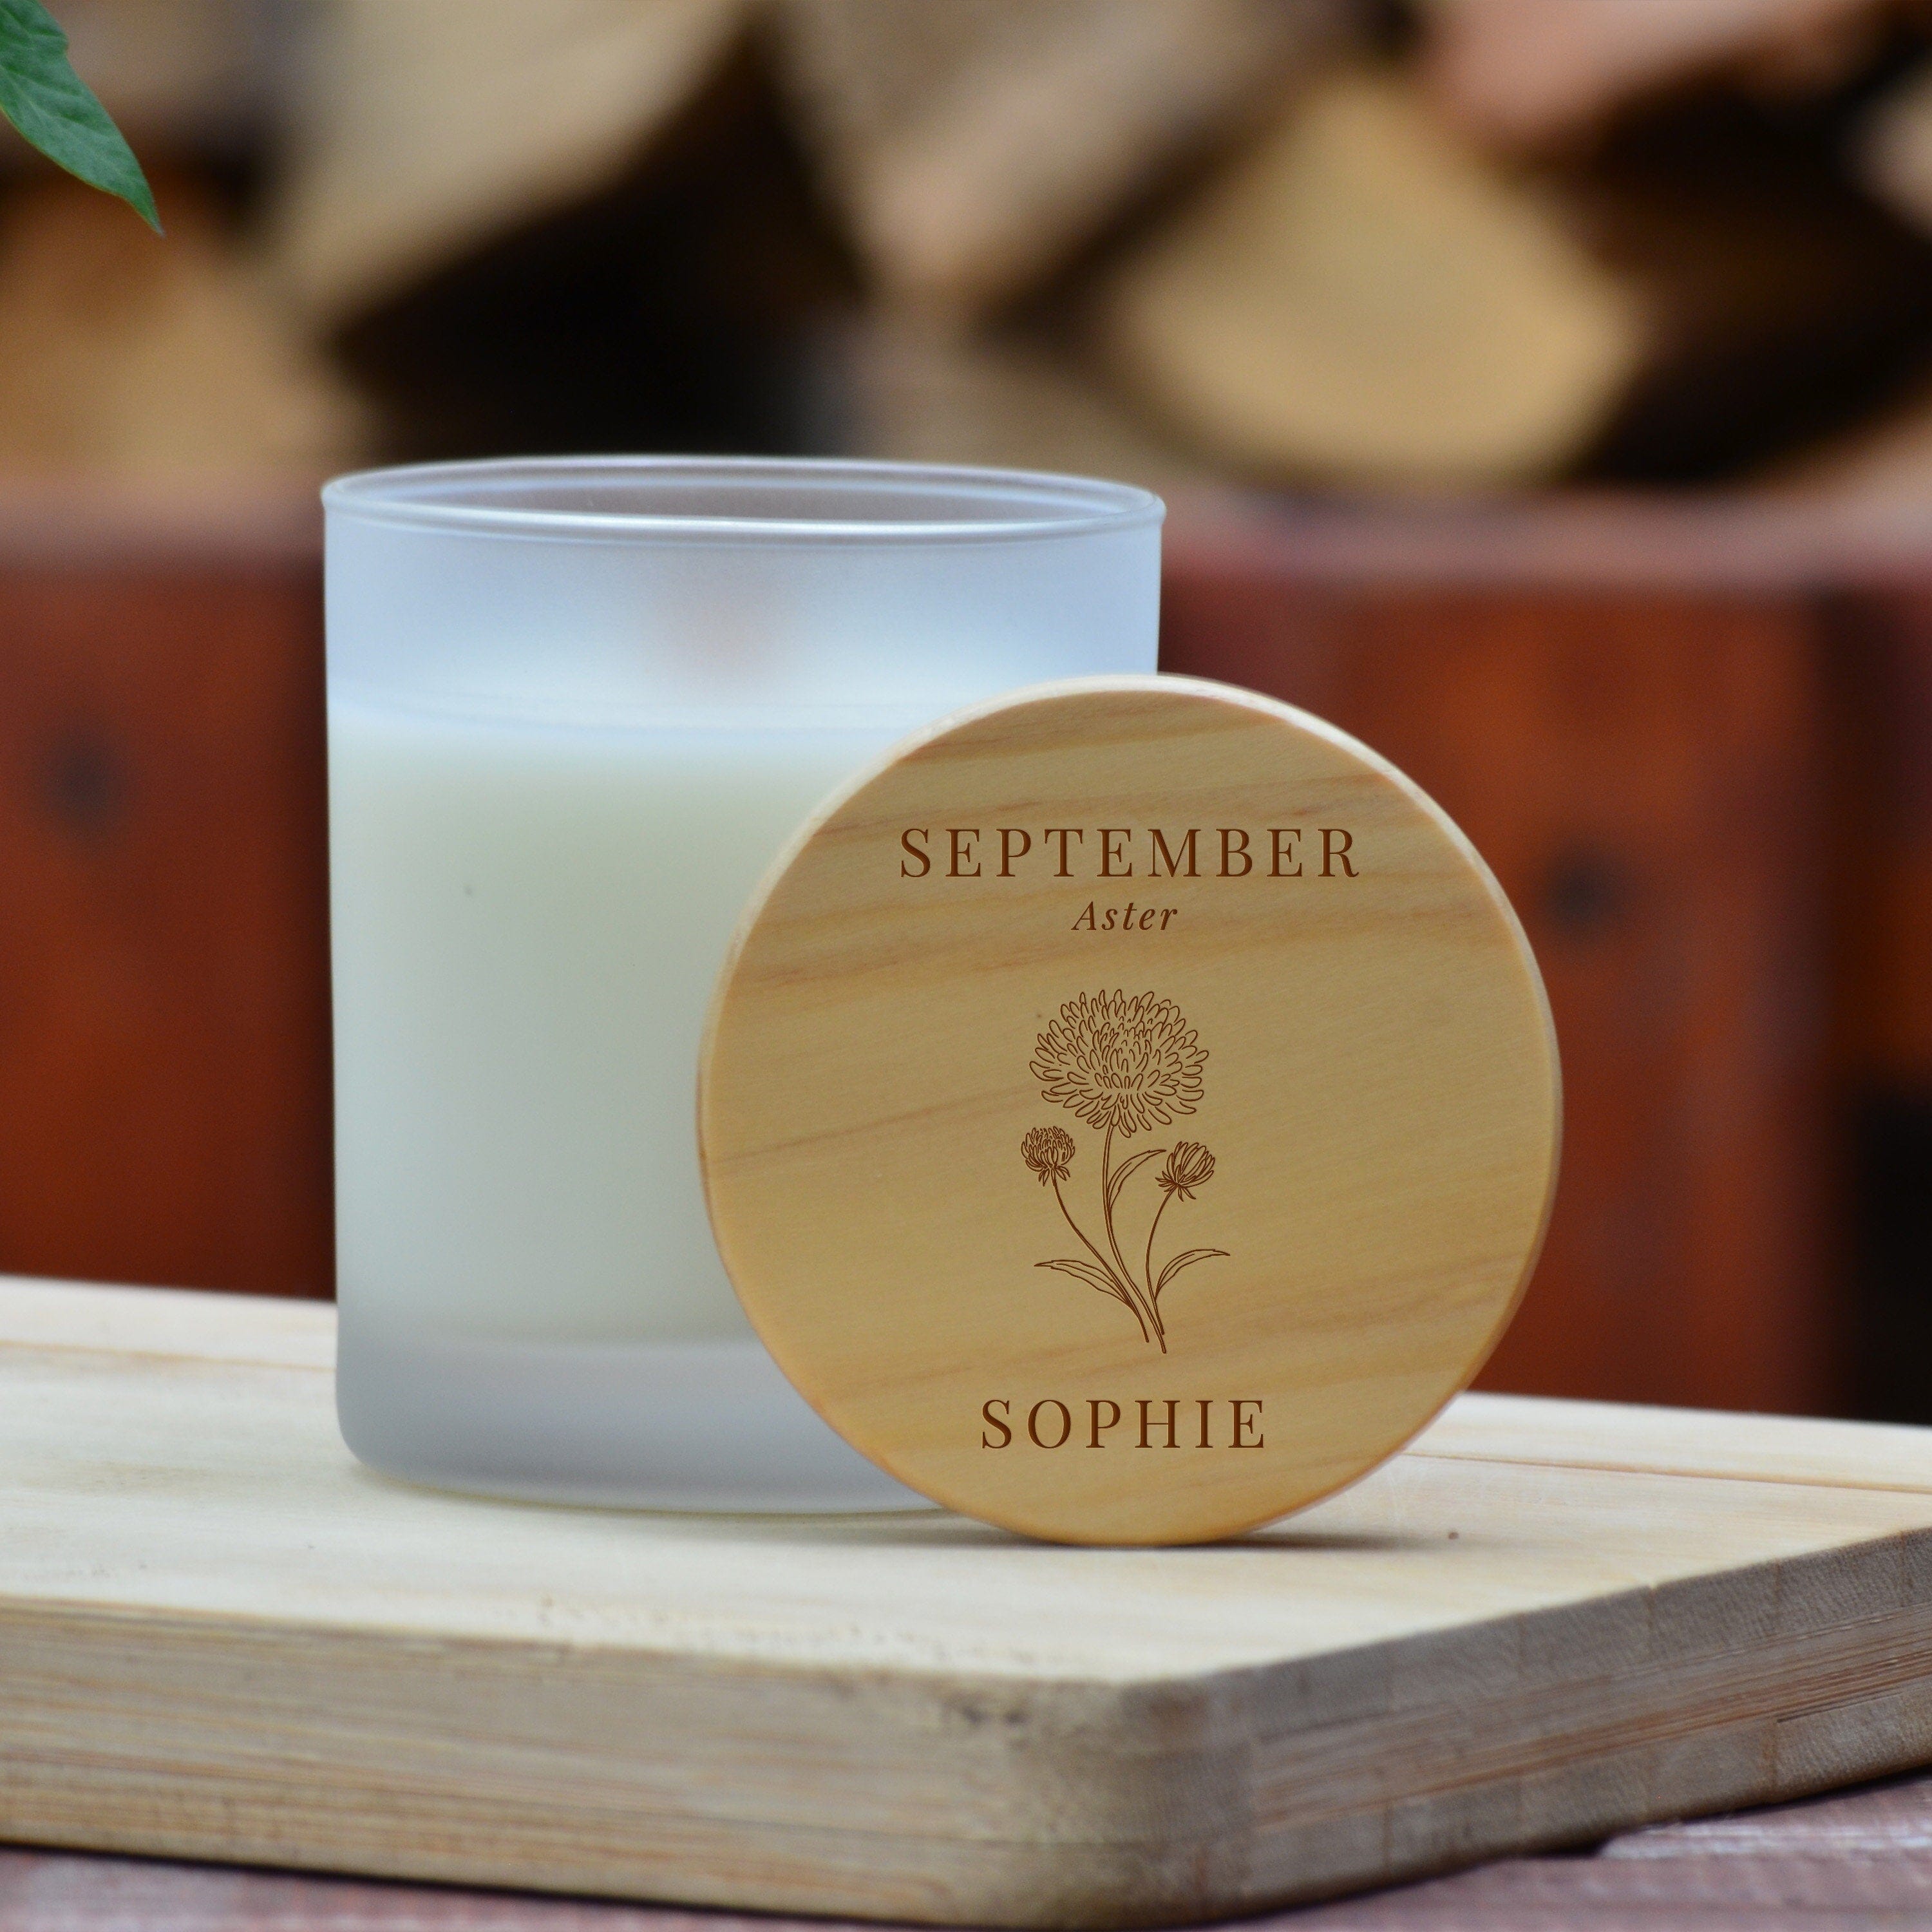 Personalised Engraving Birth Flower Candle, Birthday Gift for January February March April May June July August September October December